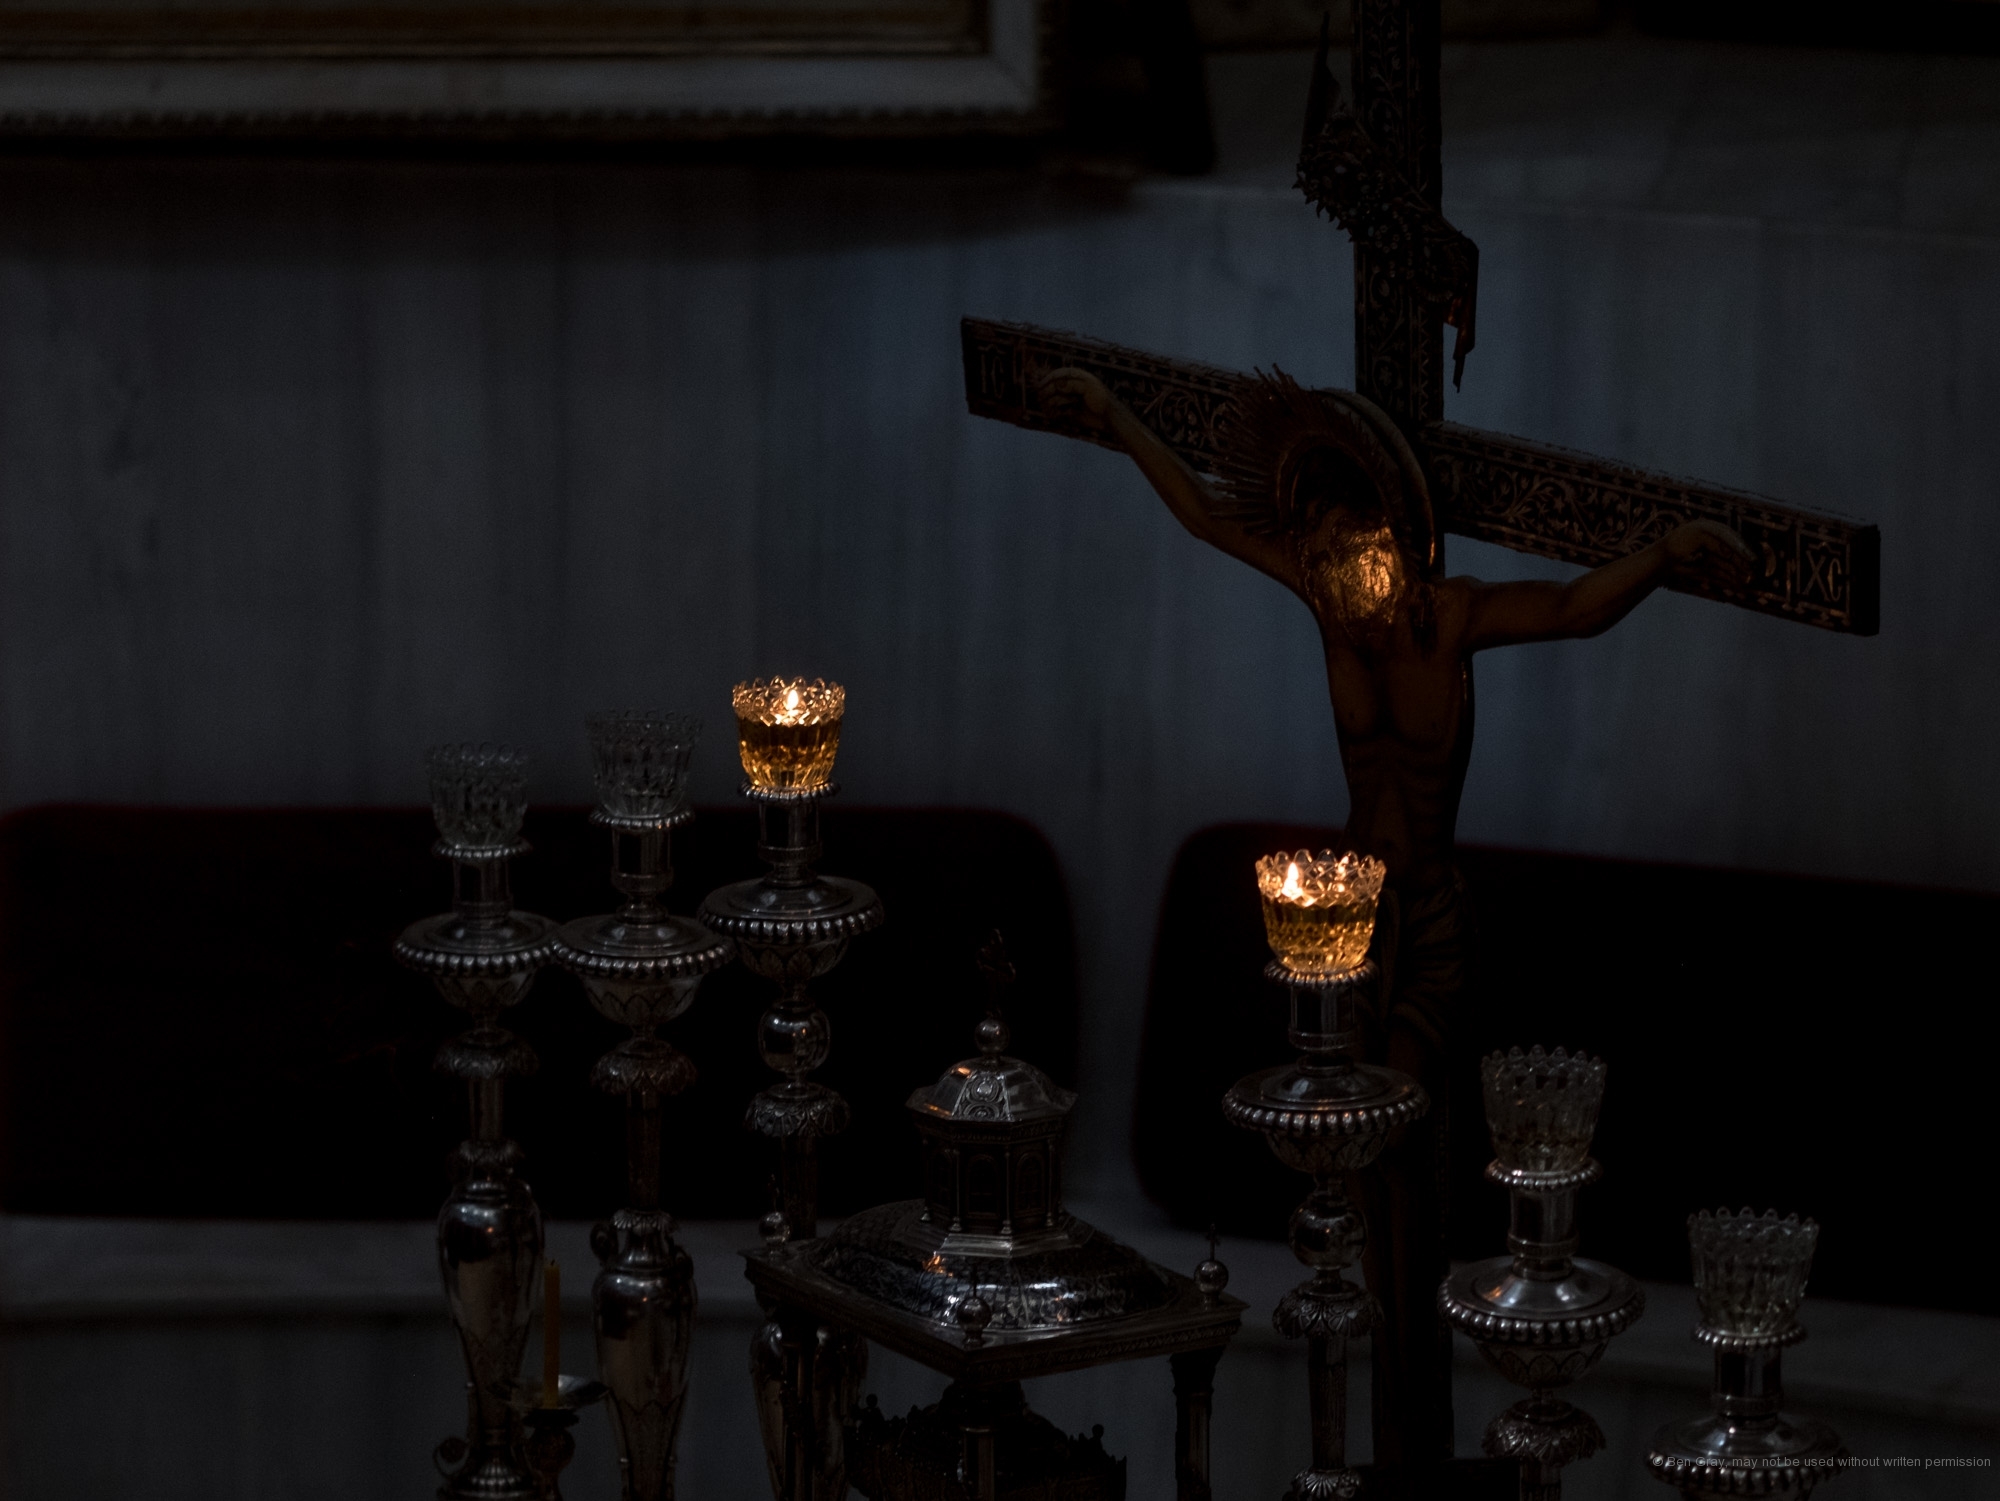 Oil lamps light up a crucifix in the sanctuary of the Greek Orthodox church inside the Church of the Holy Sepulchre.